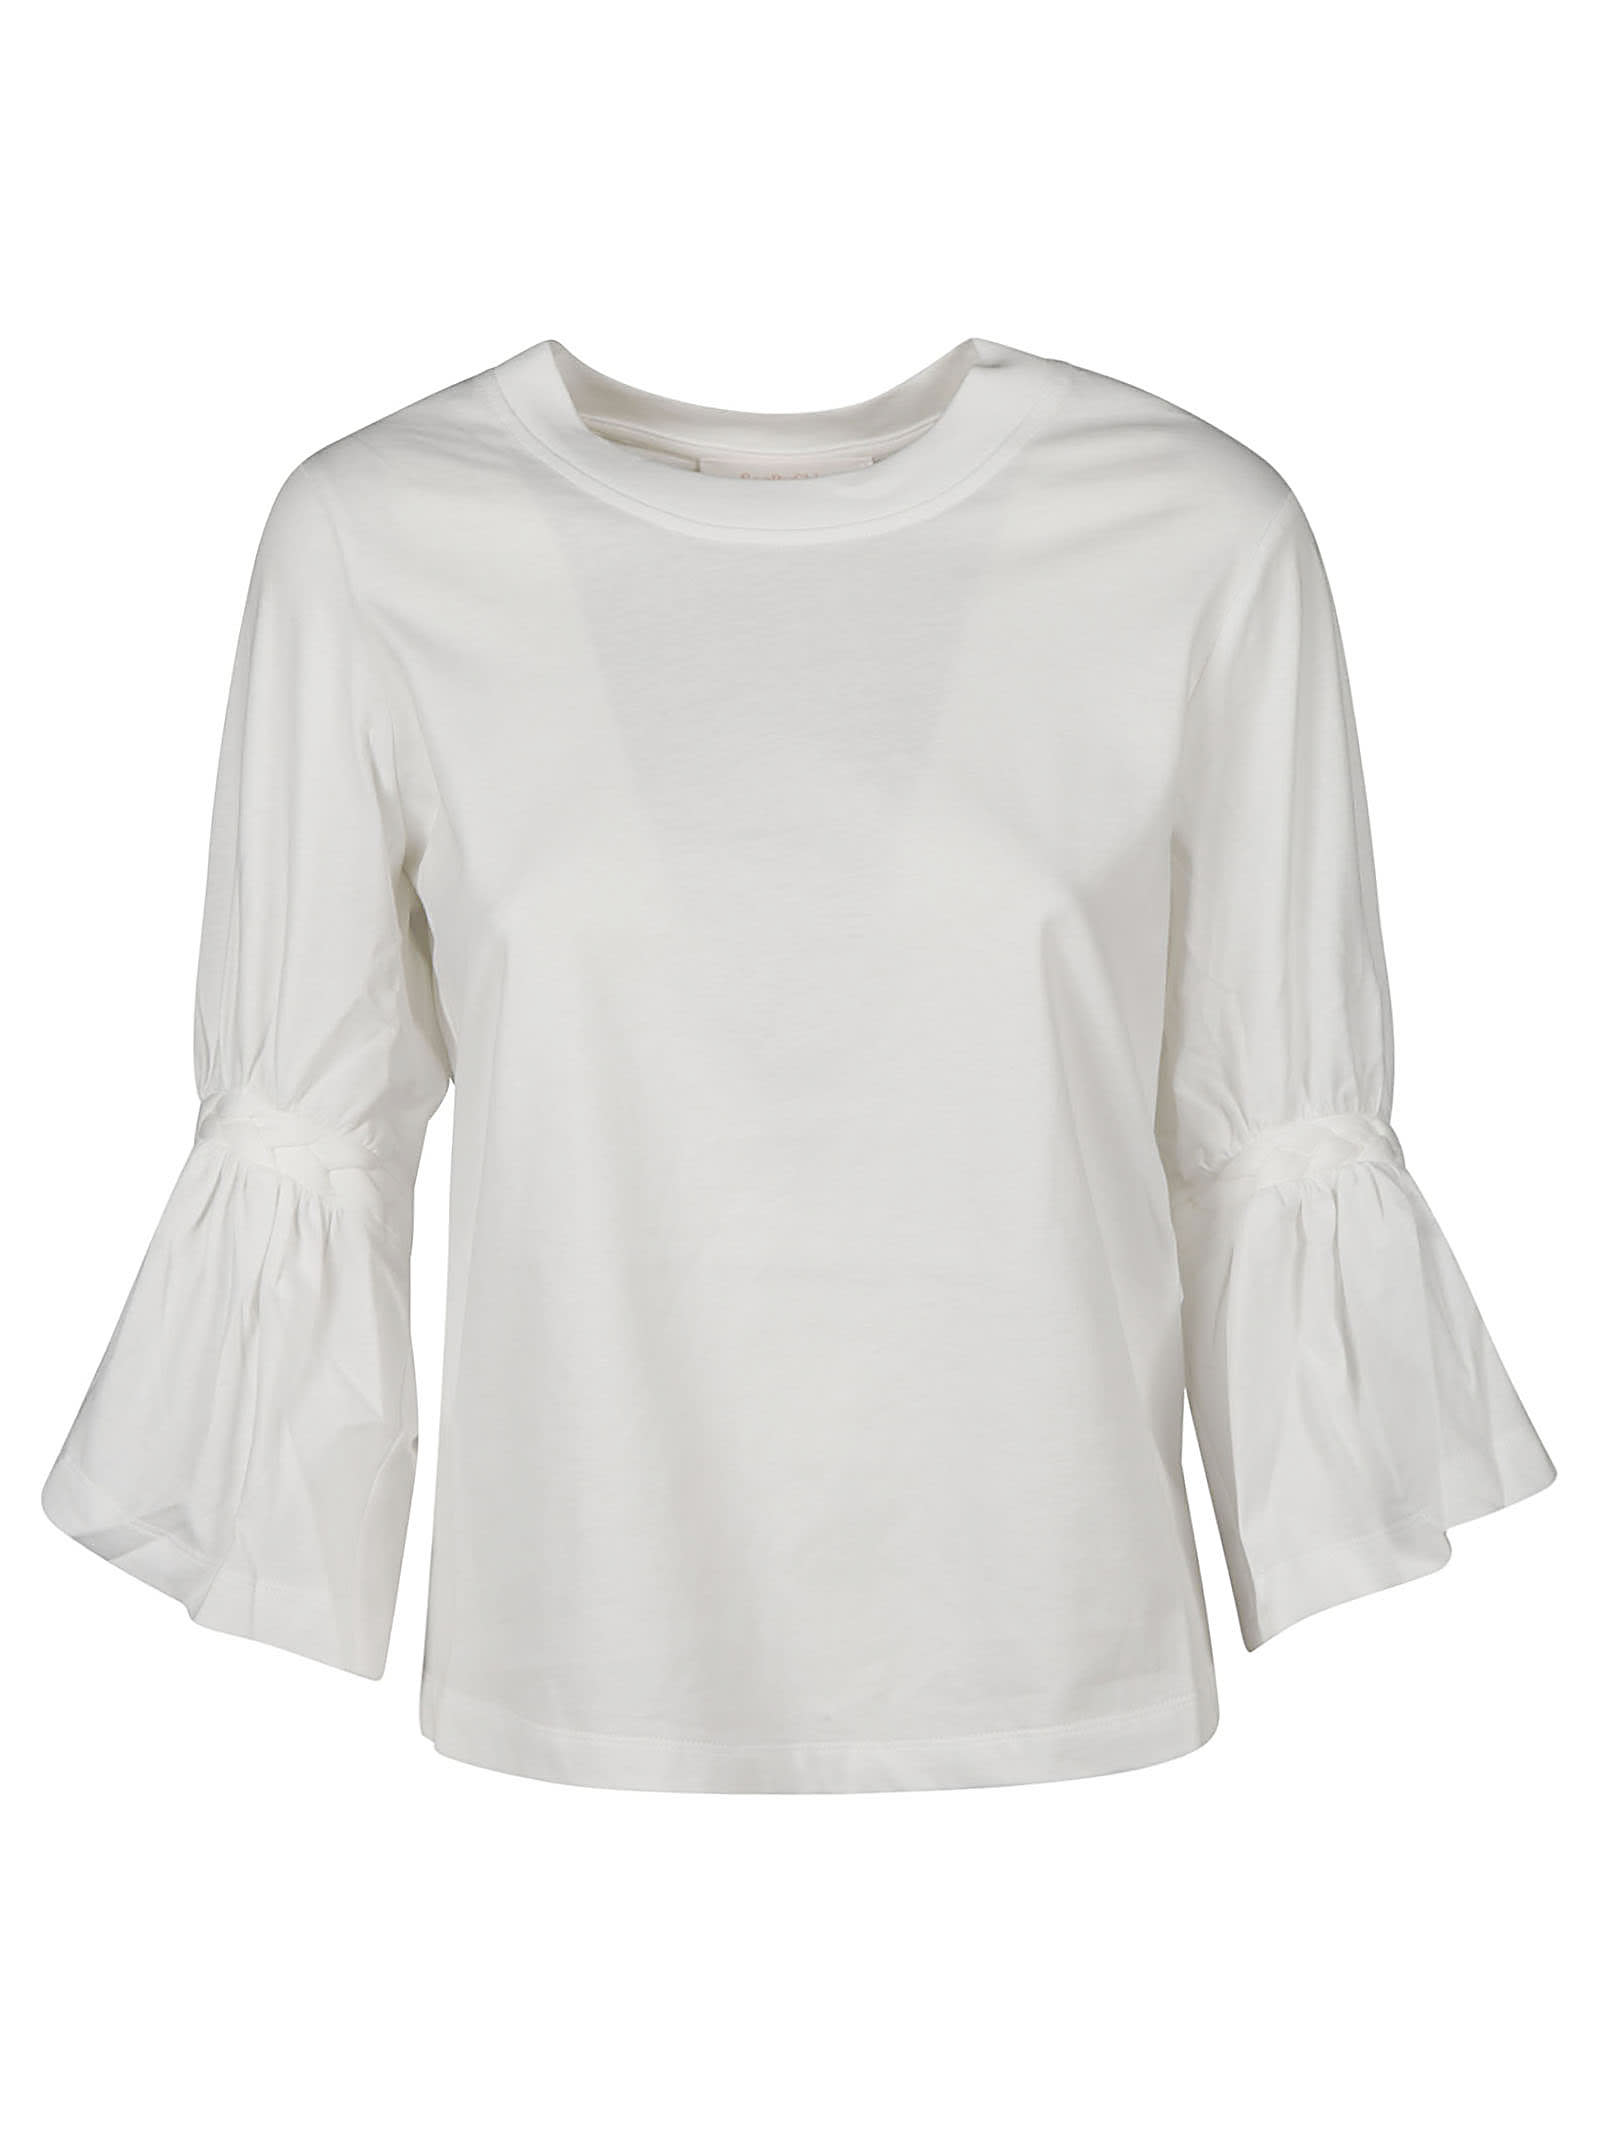 SEE BY CHLOÉ FLARED SLEEVES TOP,CHS21SJH34 098109